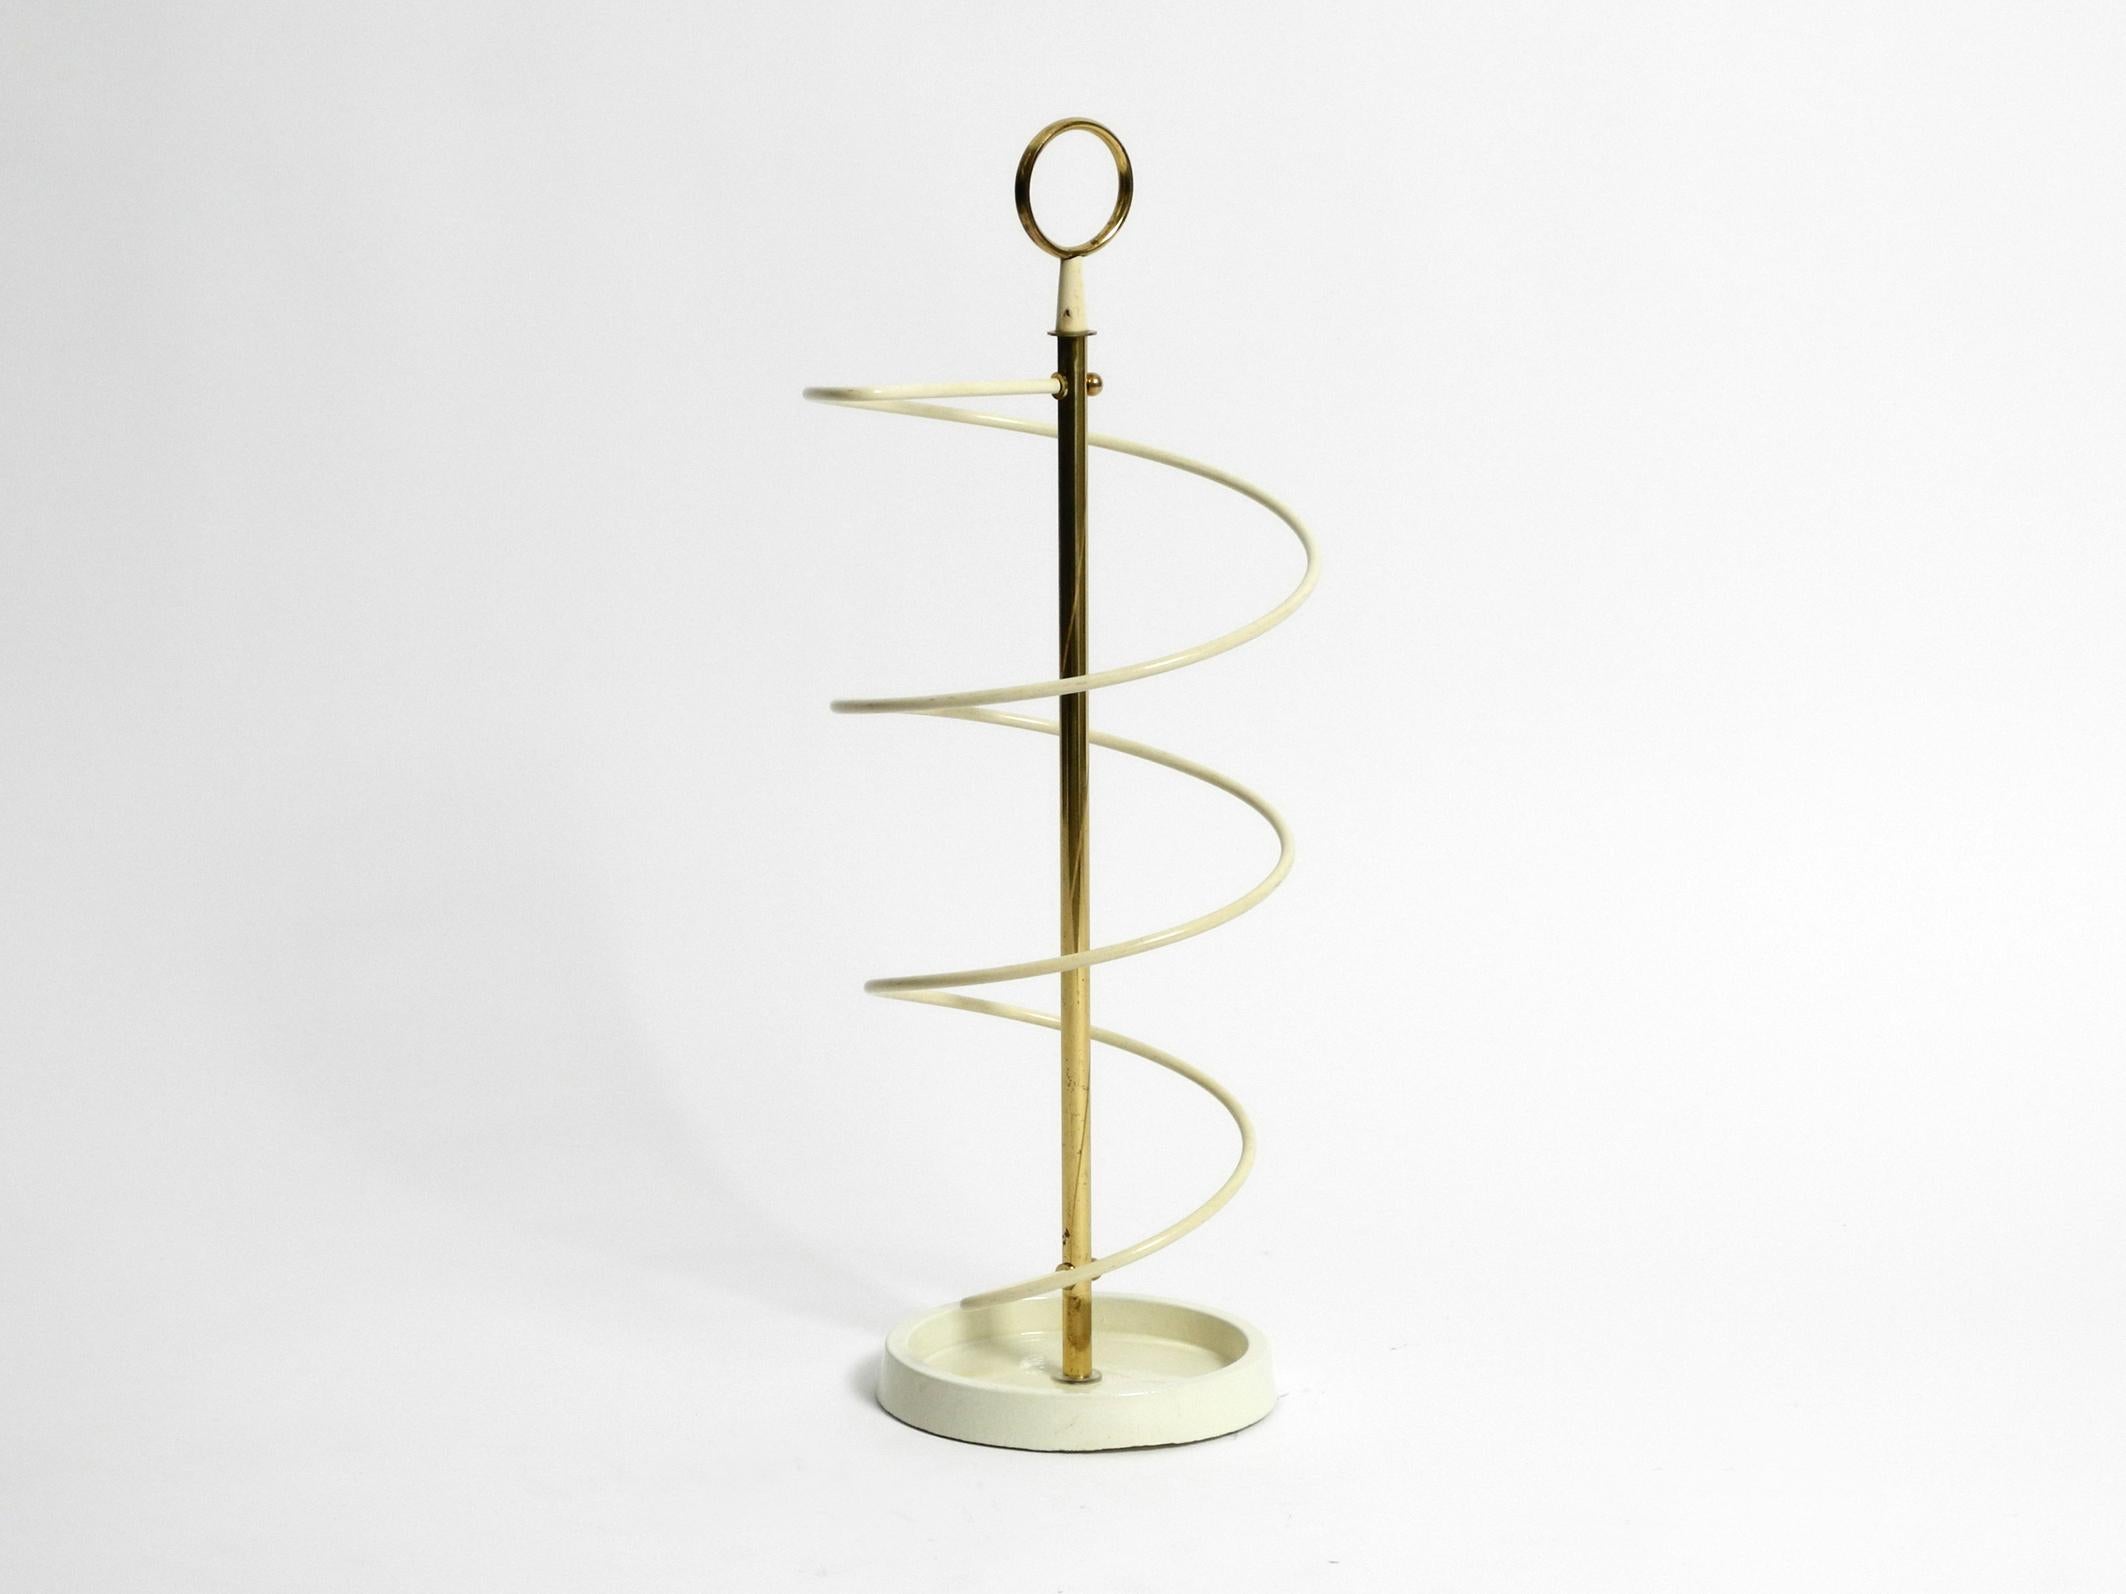 Exceptional rare Mid-Century Modern umbrella stand.
Very elegant minimalist string spiral design.
The base is made of cast iron and the metal spiral has a plastic coating.
The round handle is made of brass.
Very good condition without damages